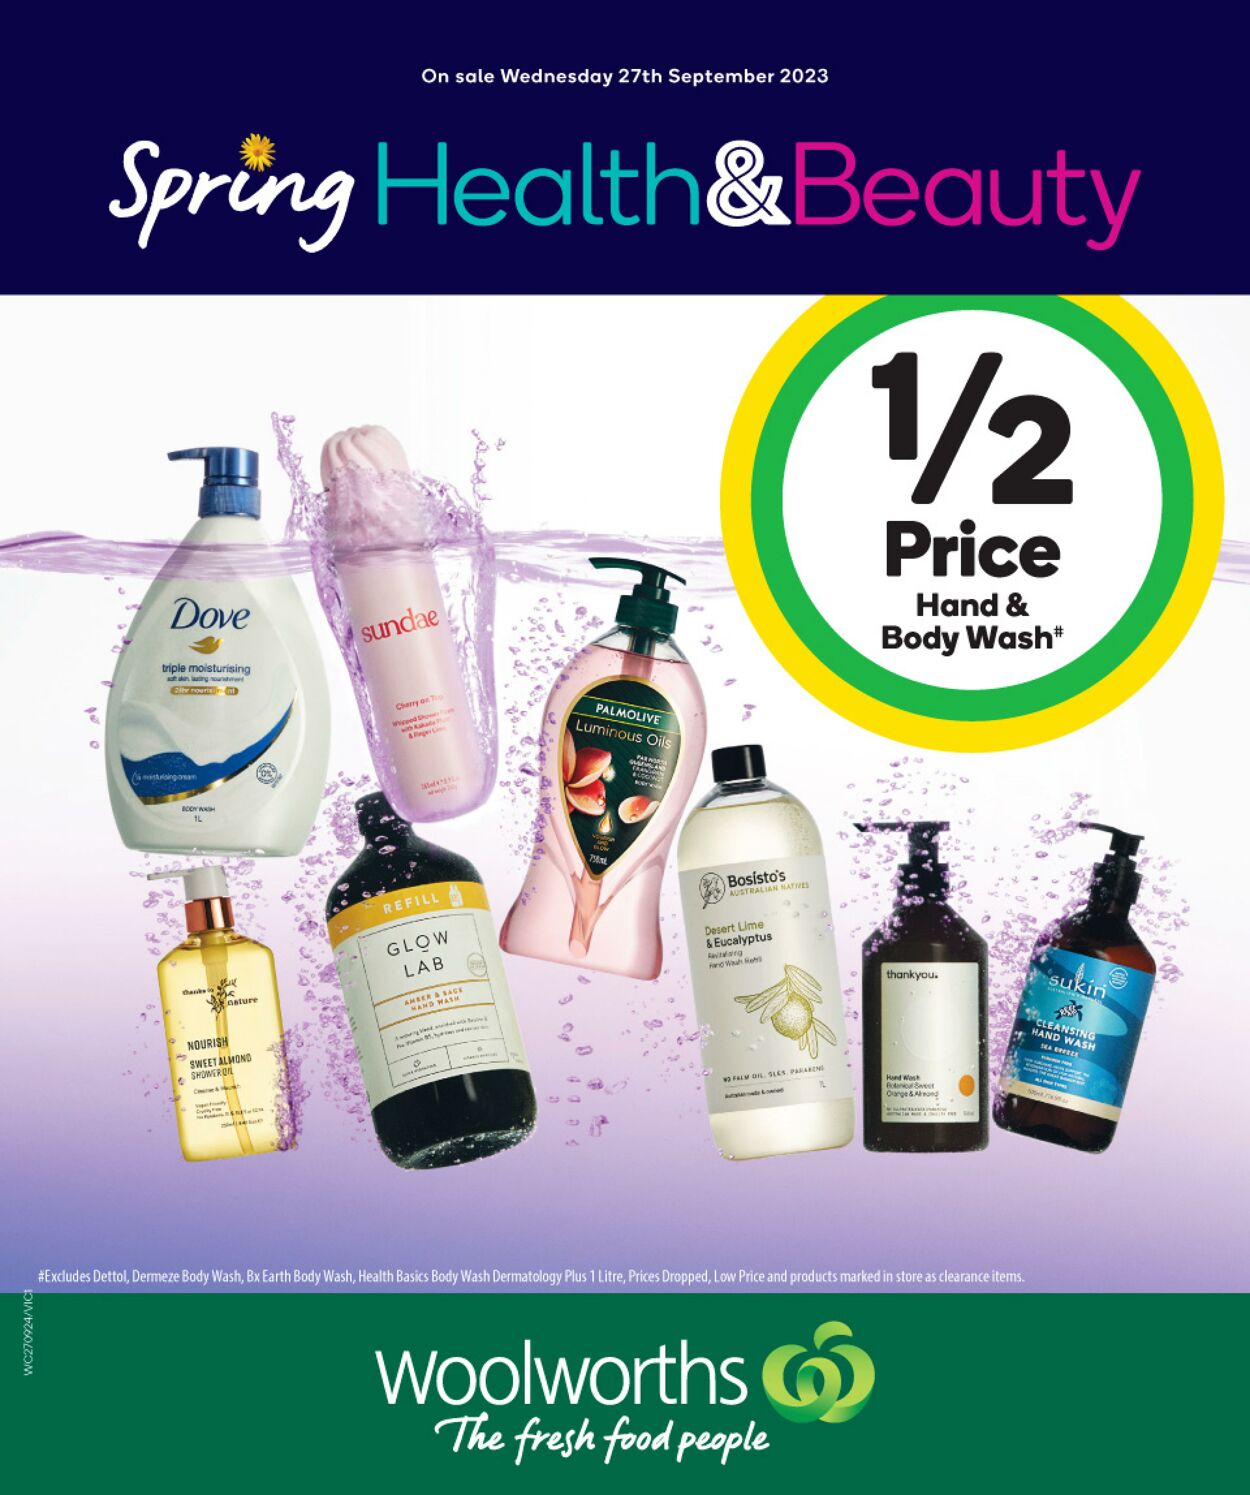 Catalogue Woolworths - Spring Health & Beauty VIC 27 Sep, 2023 - 3 Oct, 2023